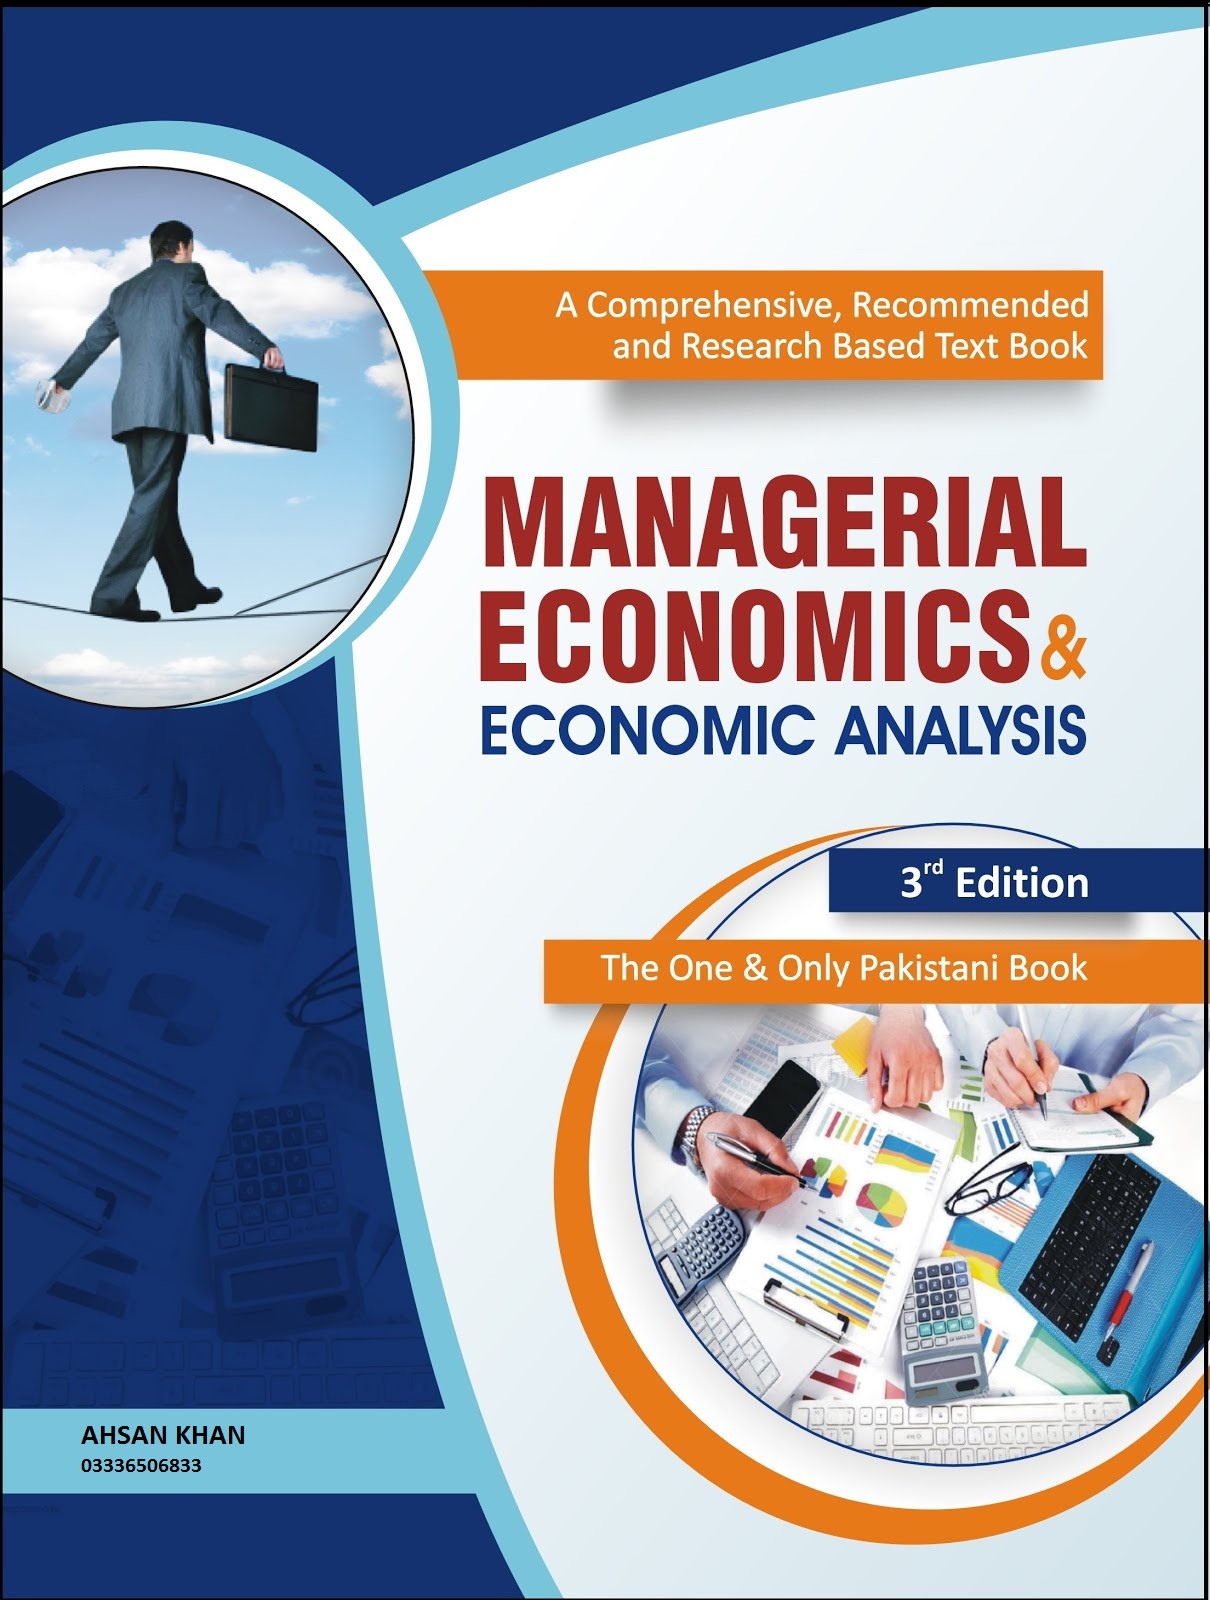 assignment on managerial economics